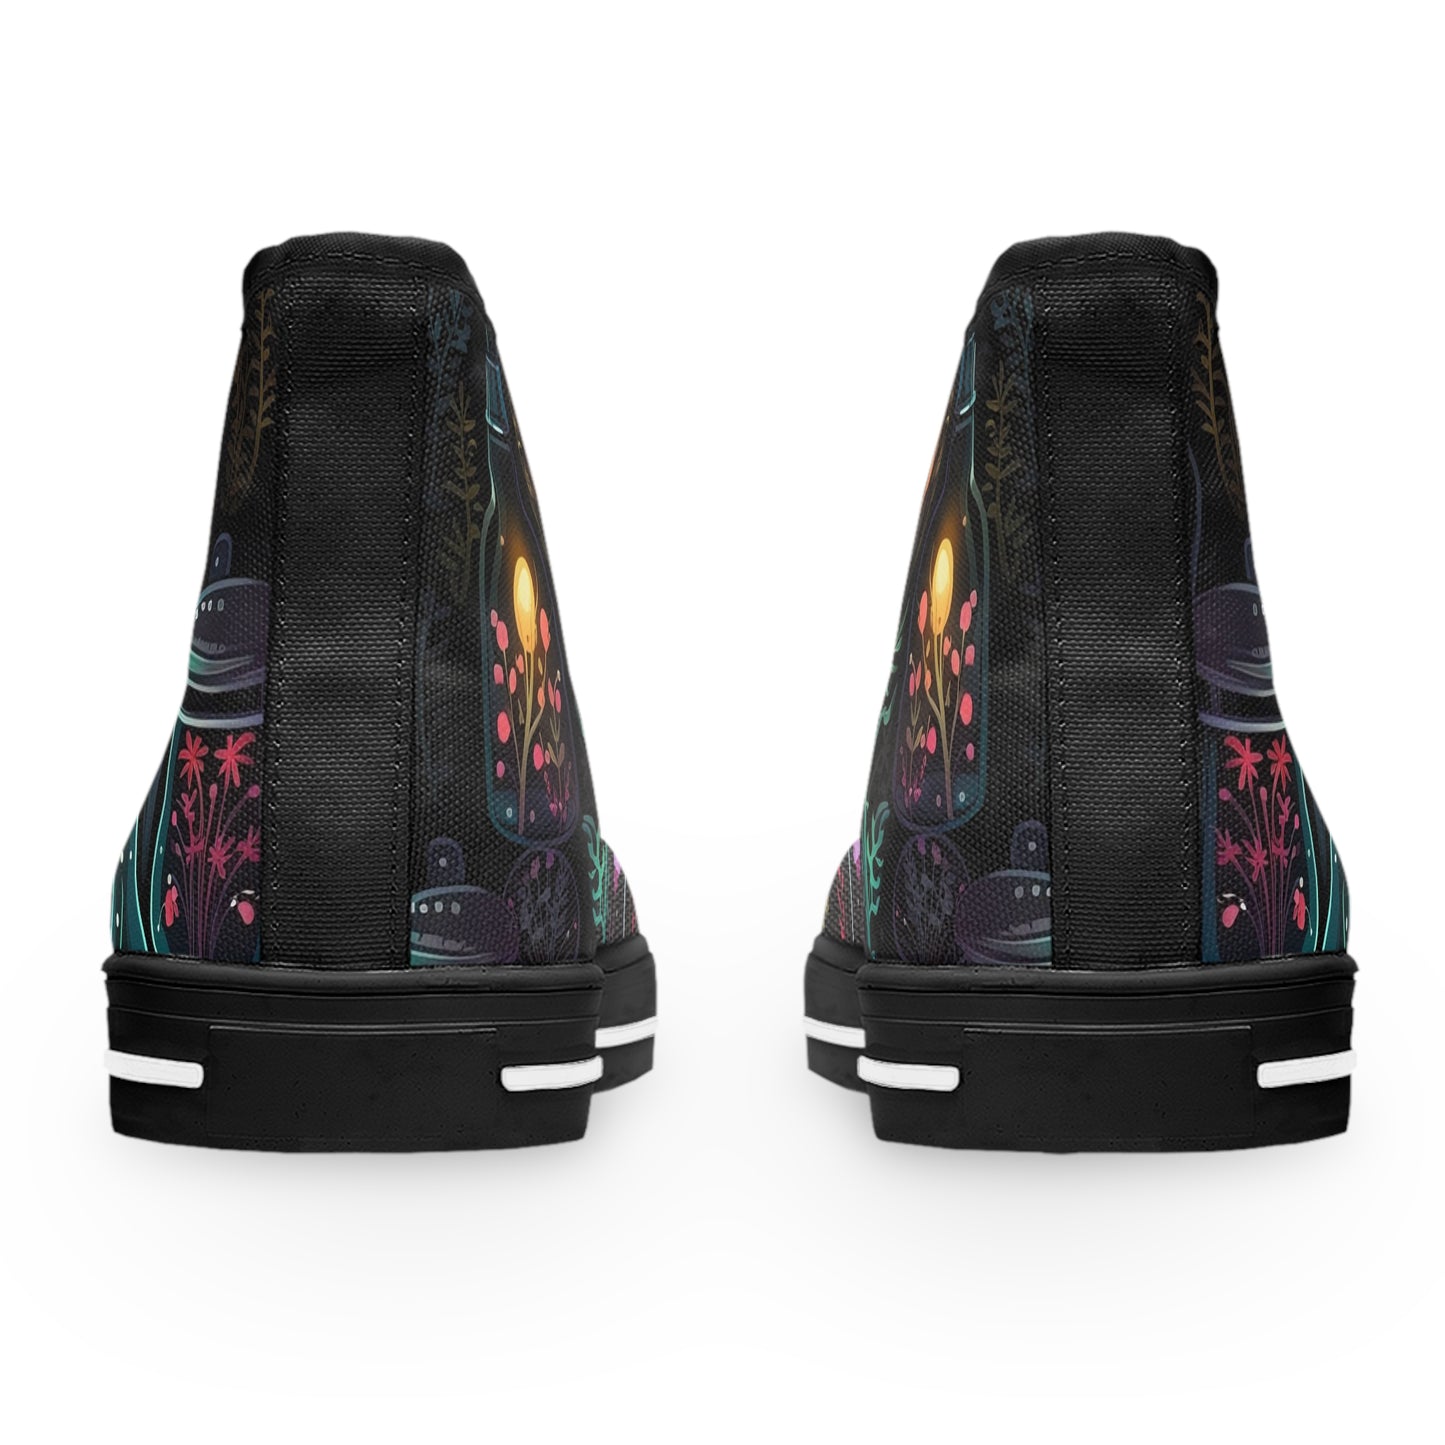 Dark Forest Women's High Top Sneakers | Whimsigoth, Witchy Aesthetic